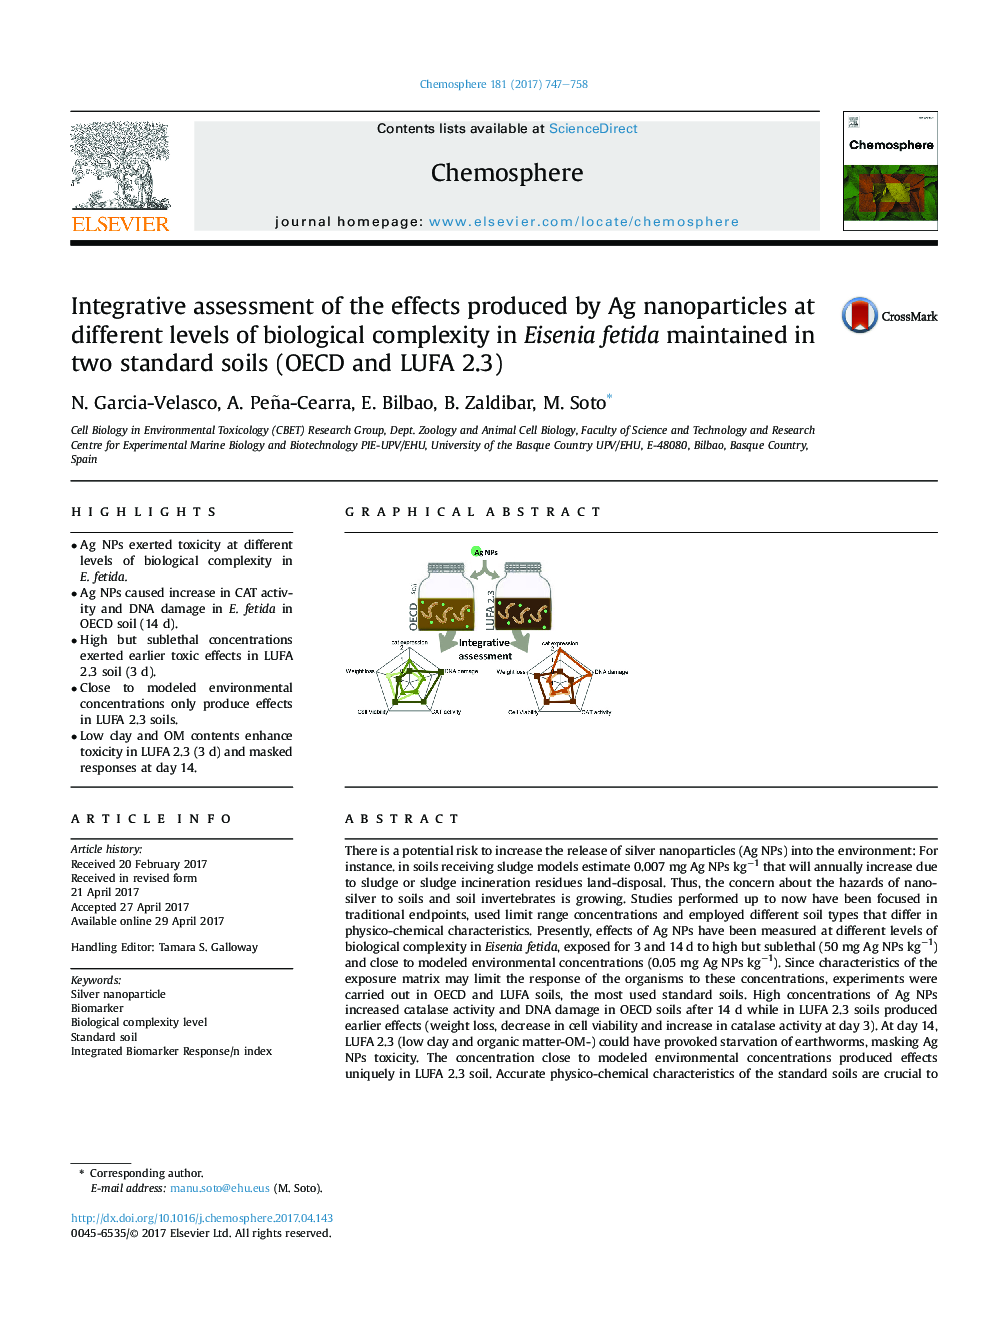 Integrative assessment of the effects produced by Ag nanoparticles at different levels of biological complexity in Eisenia fetida maintained in two standard soils (OECD and LUFA 2.3)